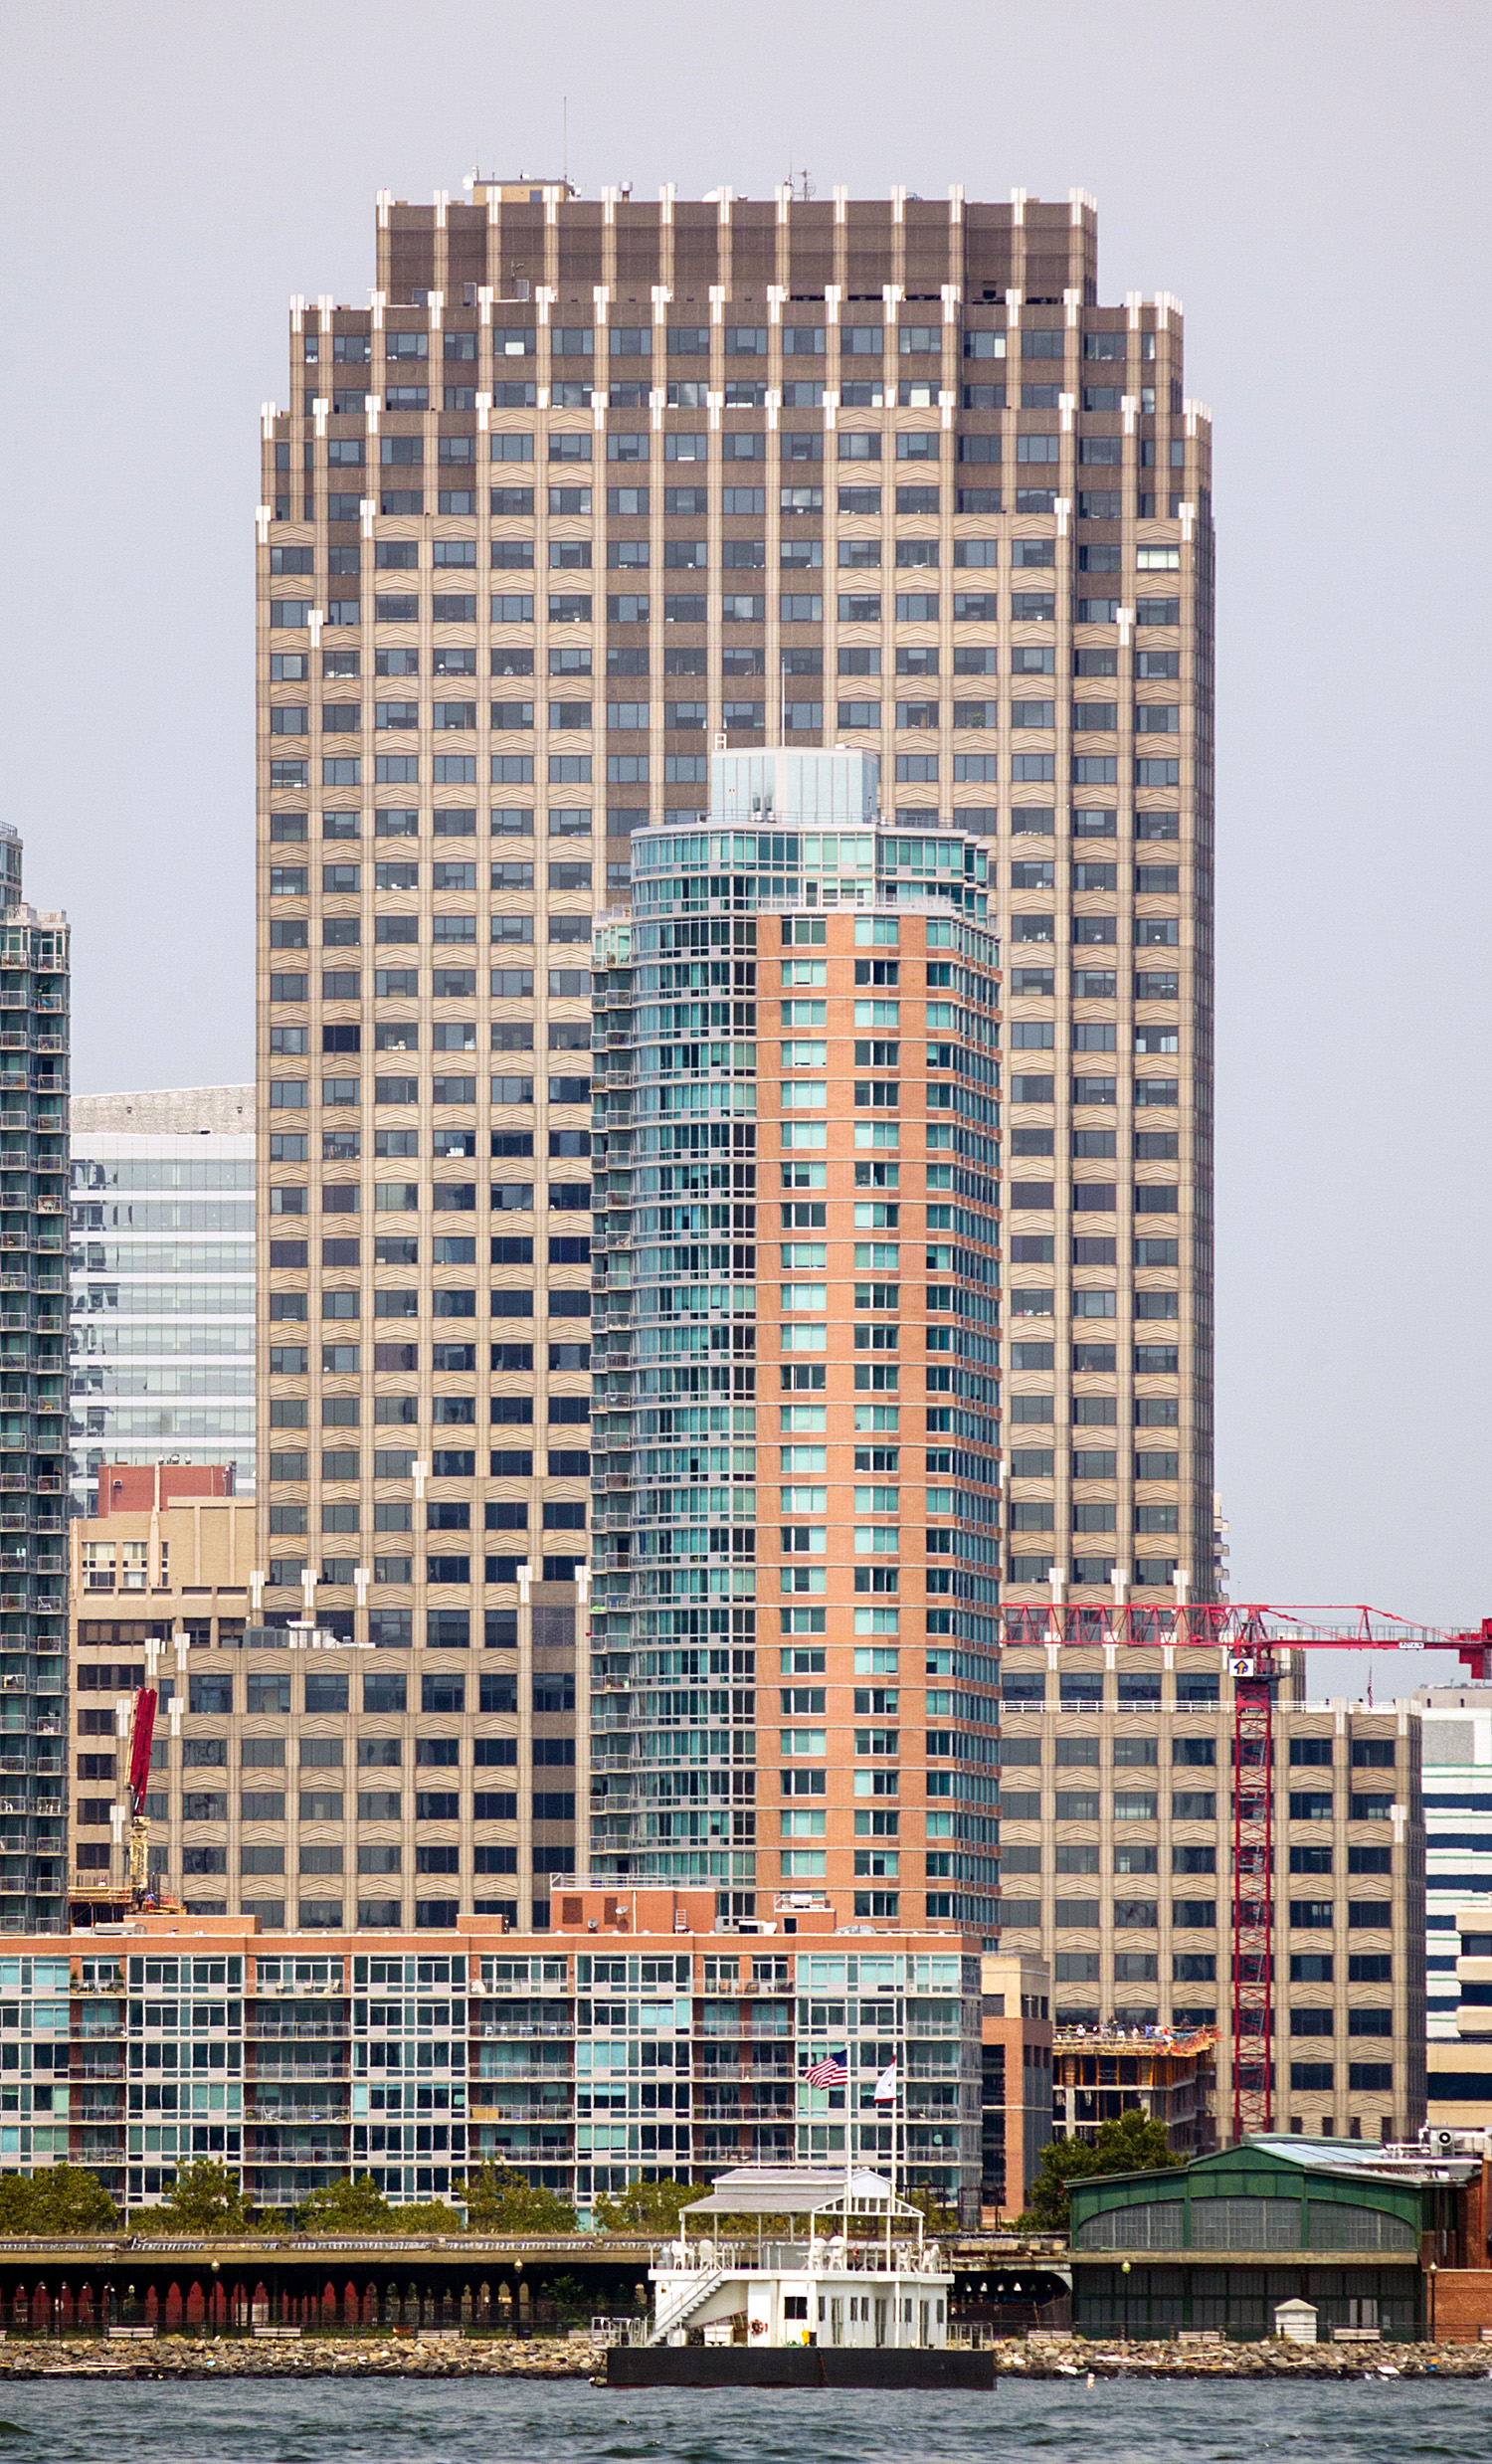 Merrill Lynch Building, Jersey City - View from Circle Line Boat Tour. © Mathias Beinling